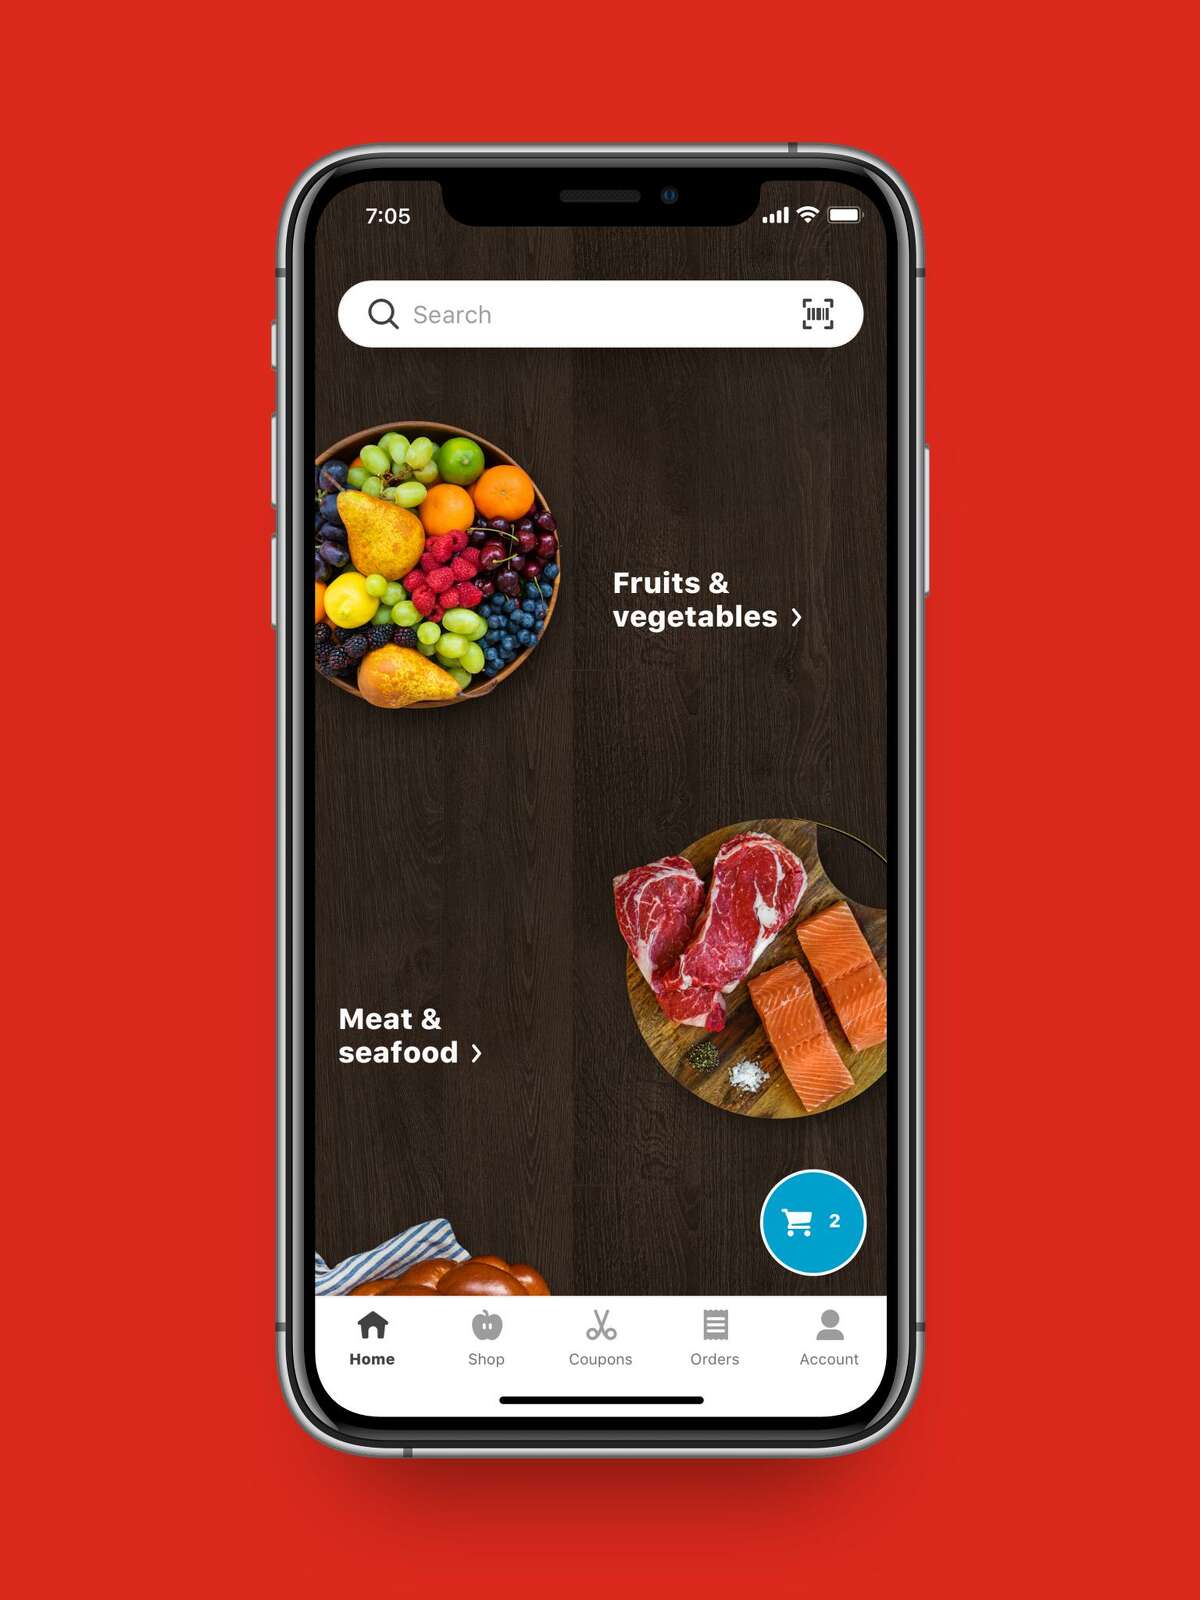 H-E-B is launching a new app, My H-E-B, available in the Apple App Store and Google Play.